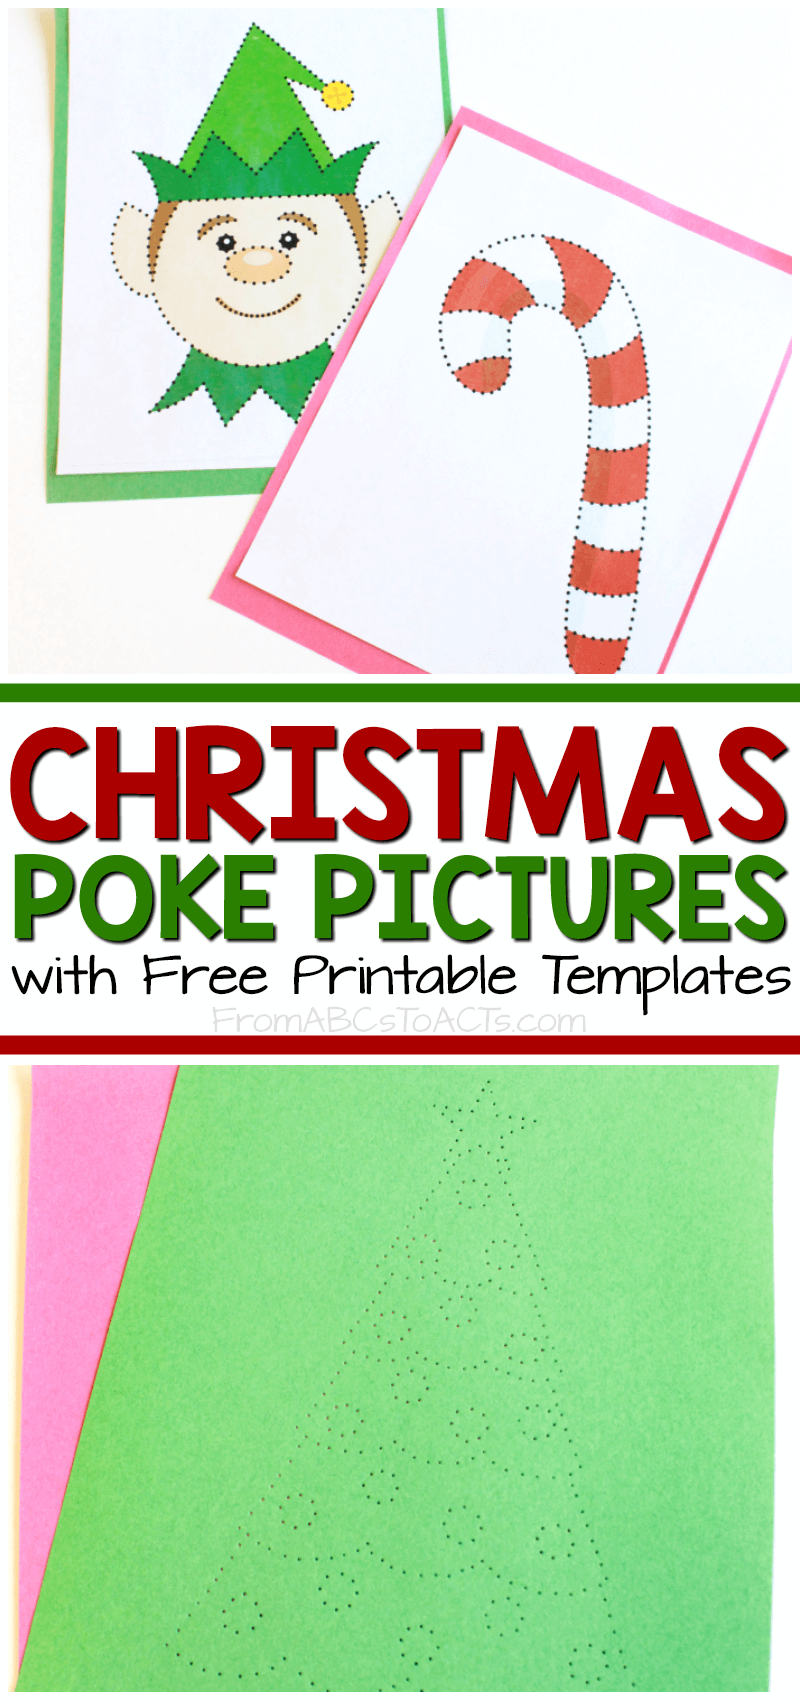 Enjoy a little Christmas crafting and work on fine motor skills with your preschooler or kindergartner at the same time and make some fantastic Christmas themed window decorations! Printable set includes 7 different holiday-themed poke picture templates to choose from!